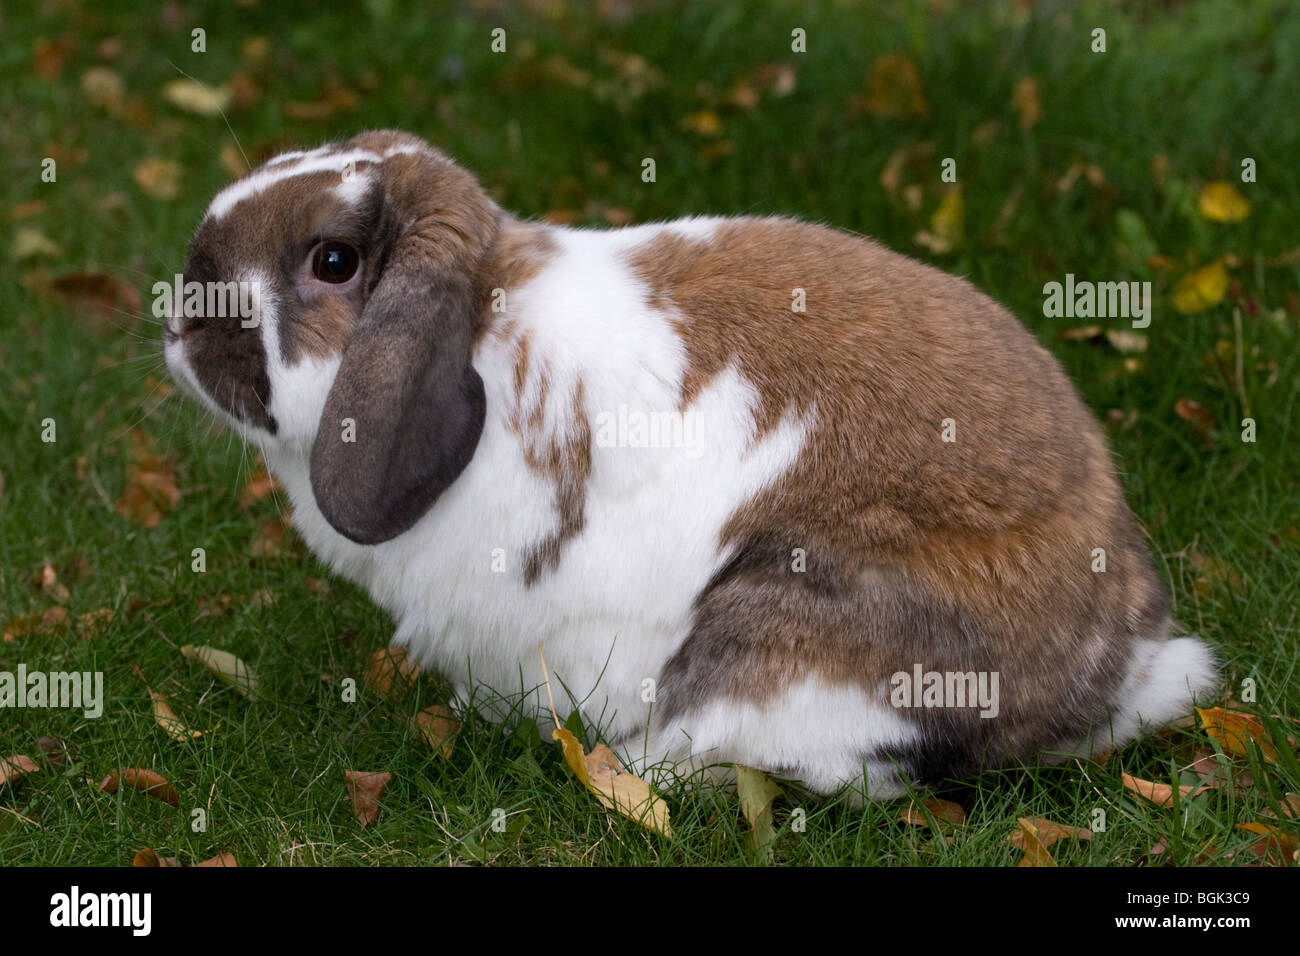 Holland Lop pet dwarf rabbit outdoors on lawn in autumn Stock Photo